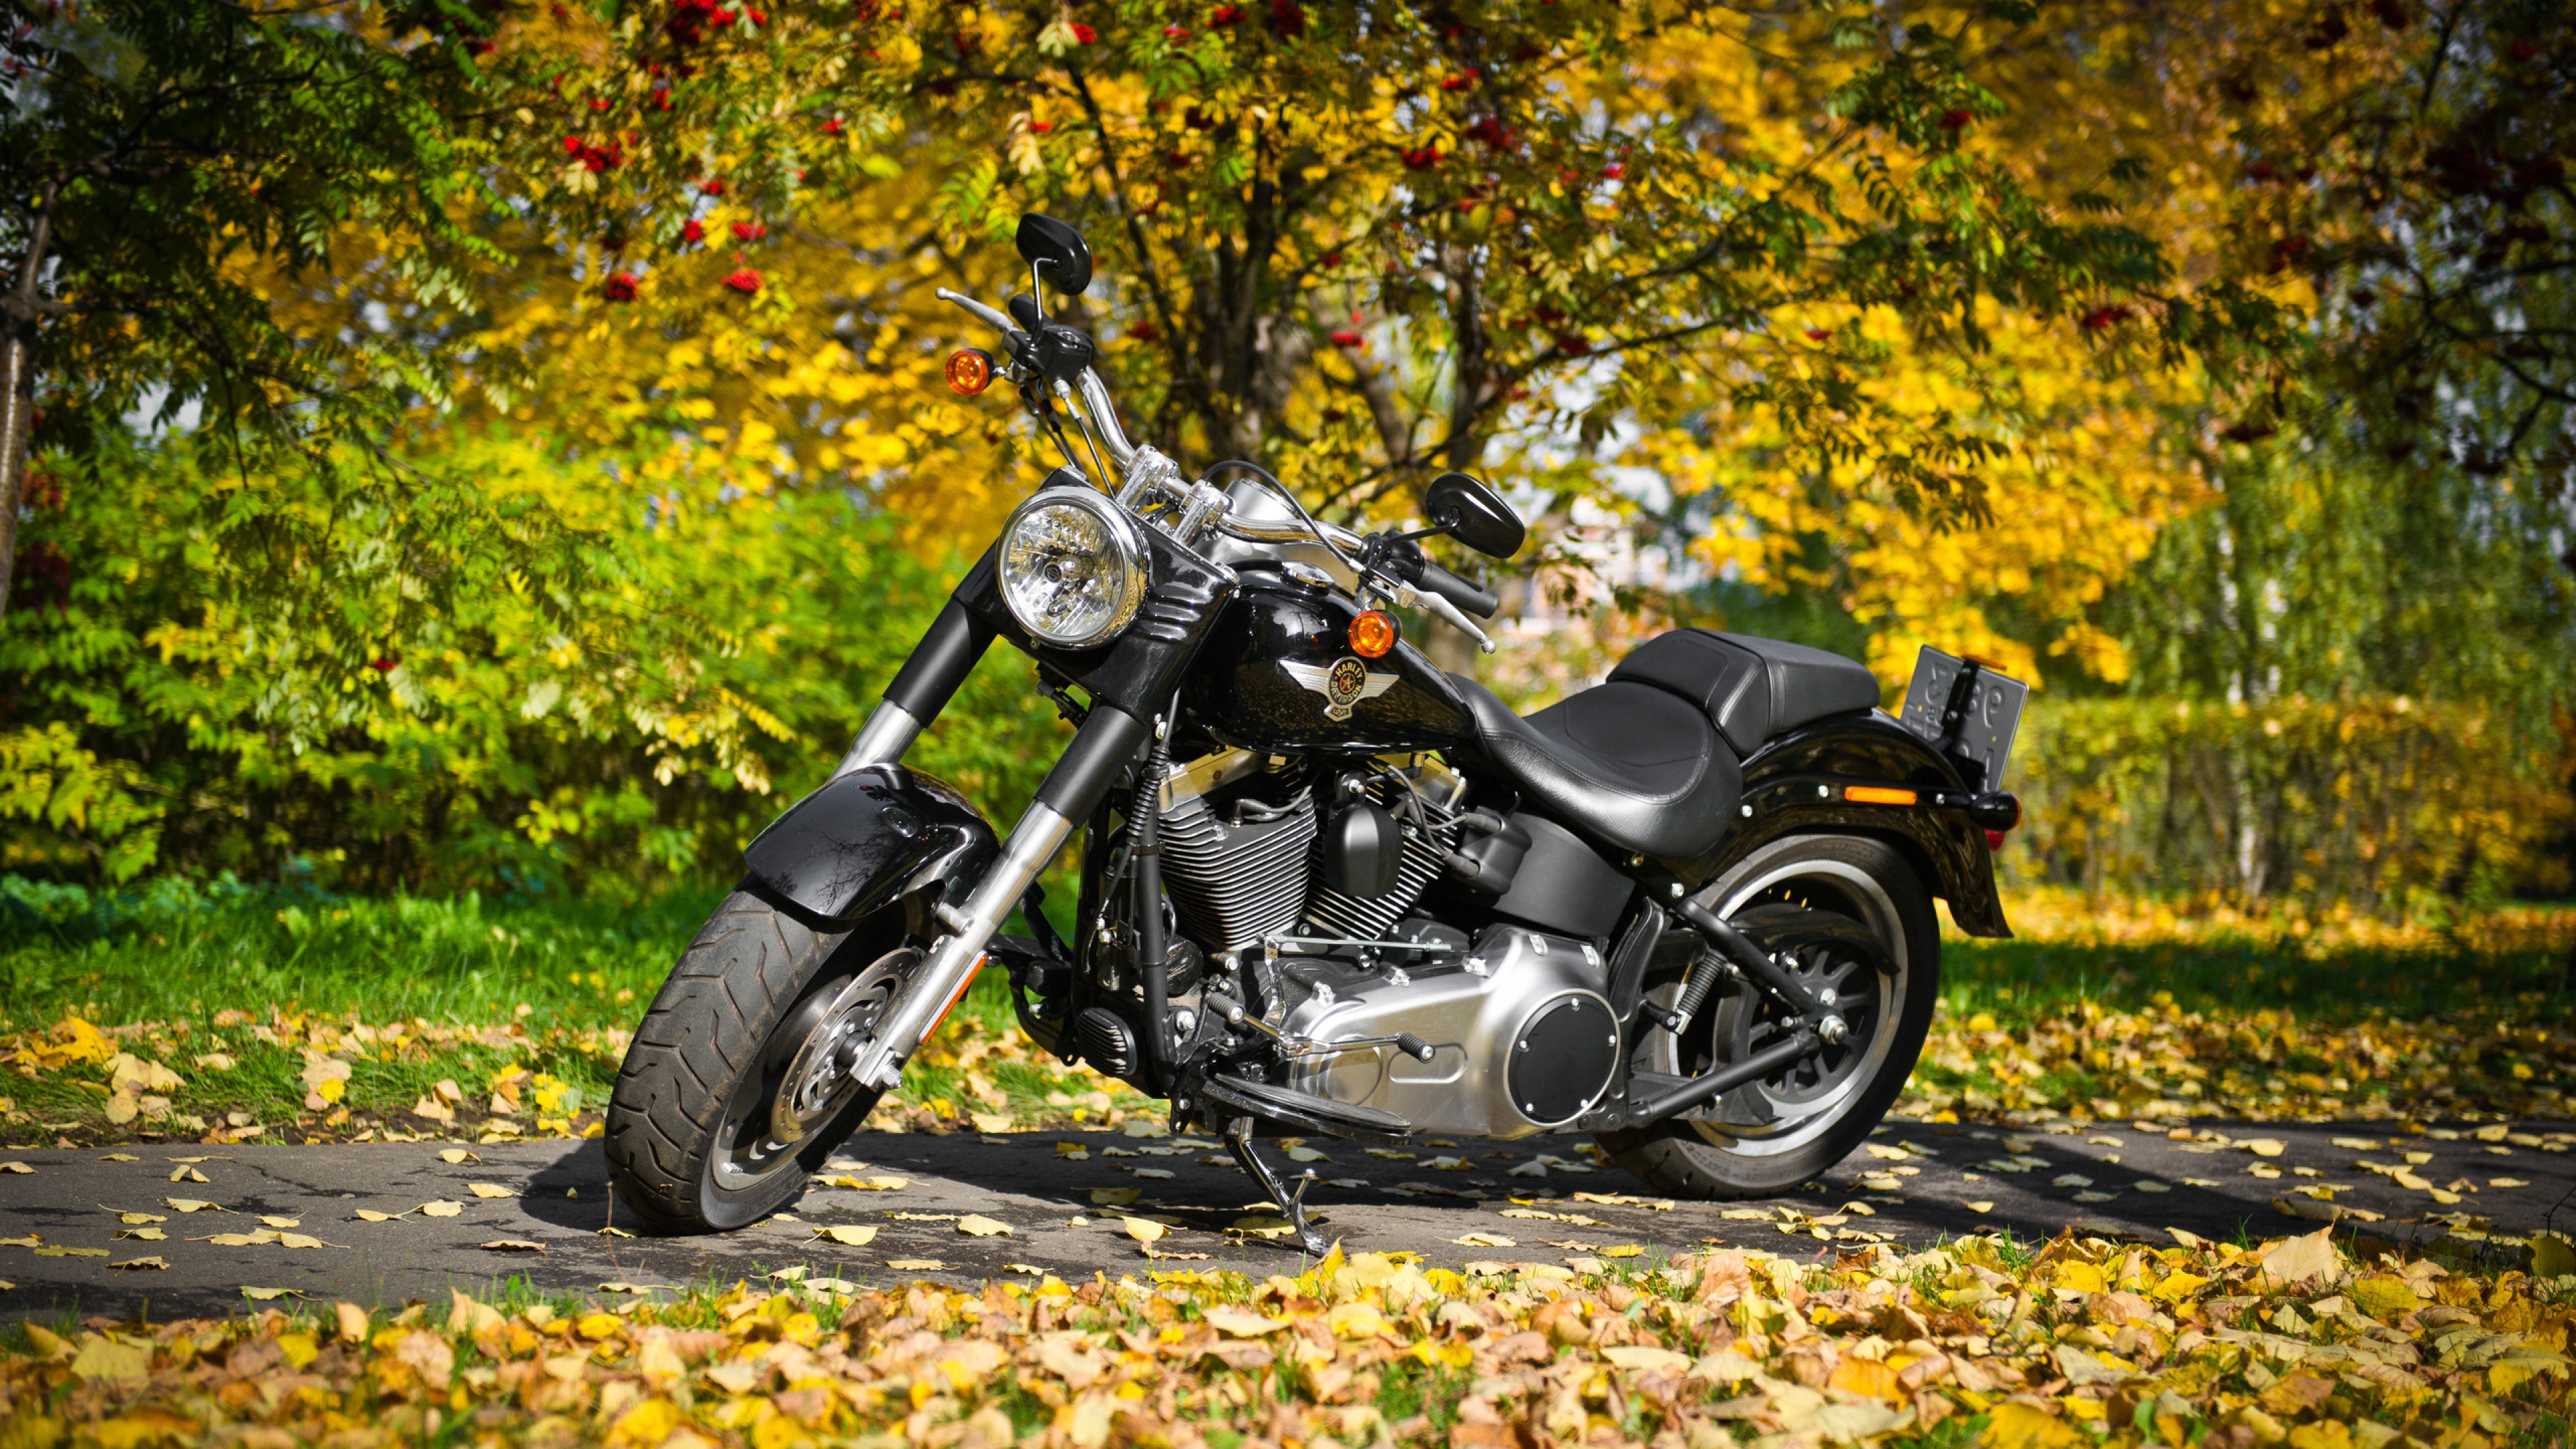 Harley Davidson Motorcycle 2, HD Bikes, 4k Wallpapers, Images, Backgrounds,  Photos and Pictures